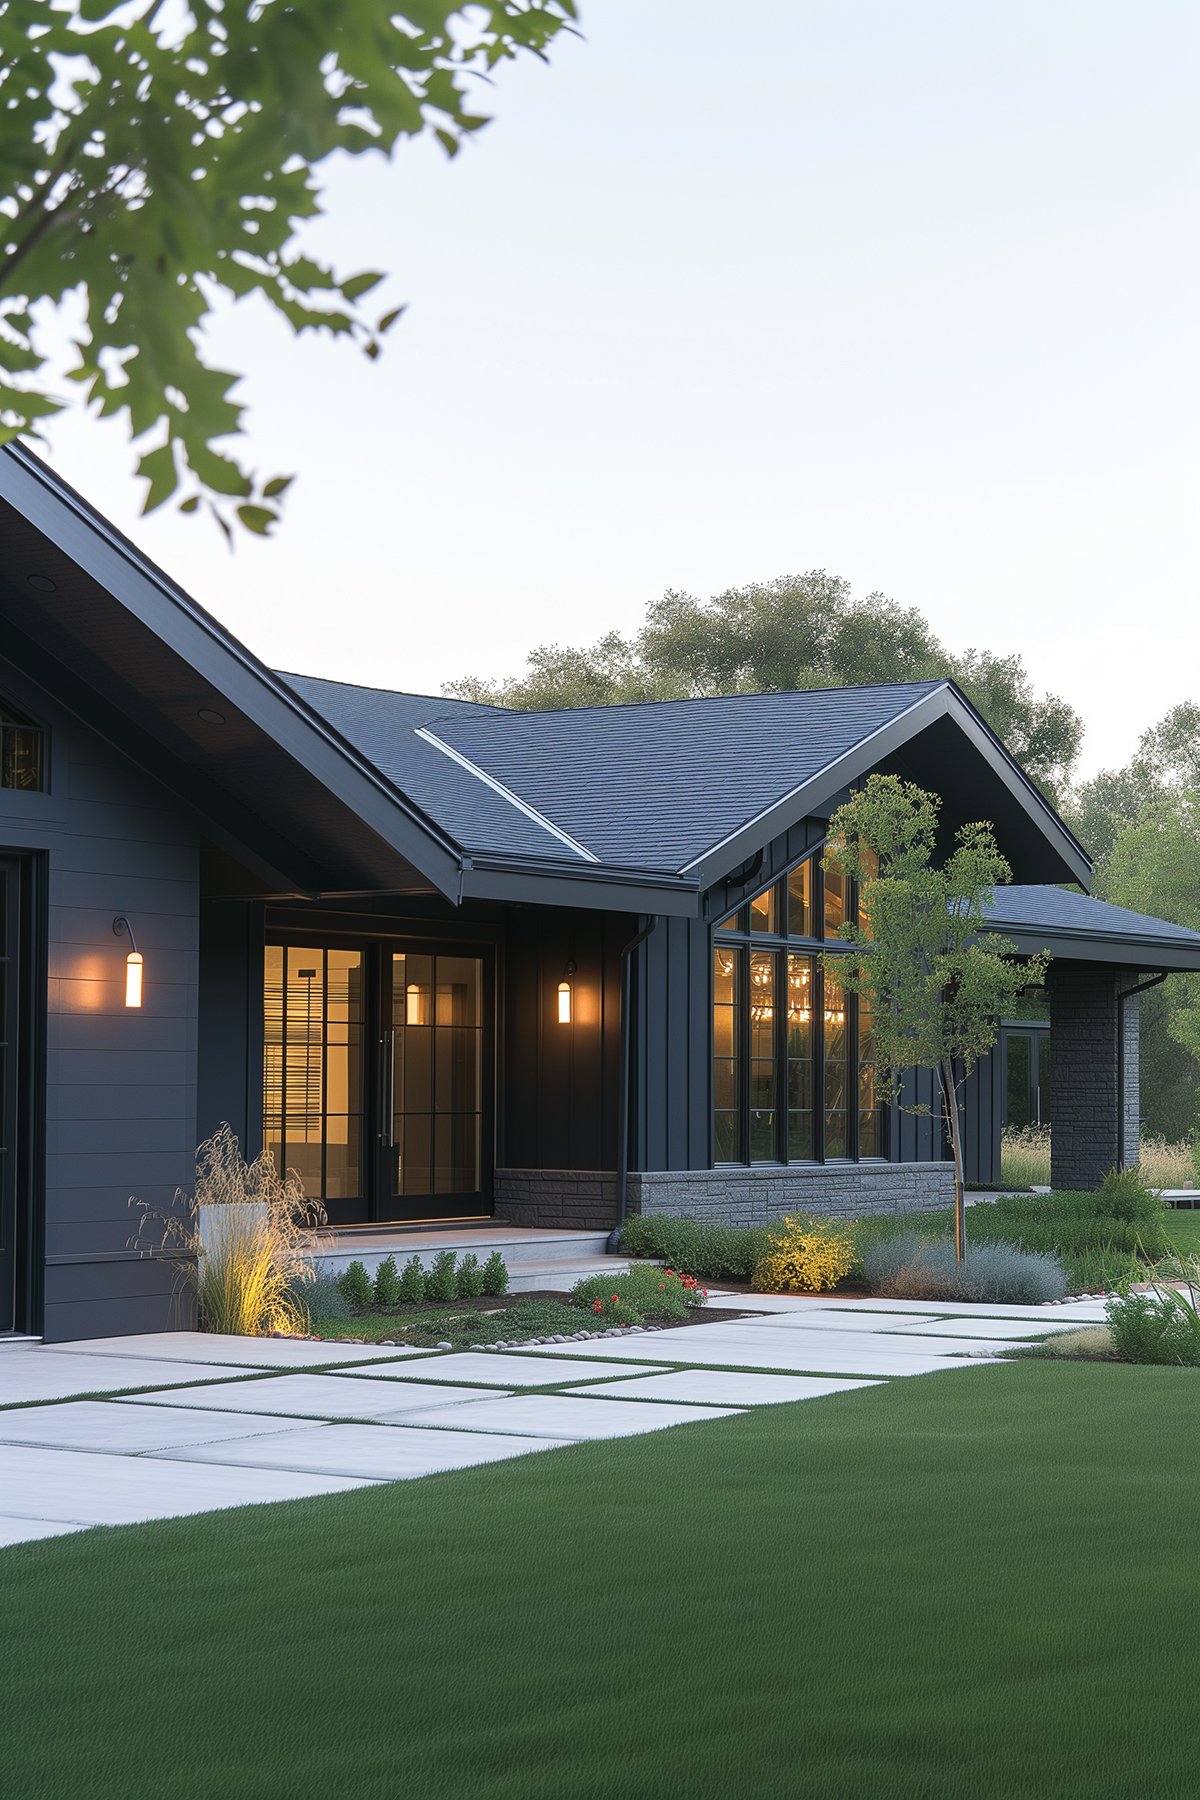 All black ranch with Sherwin Wiliams Iron Ore siding.